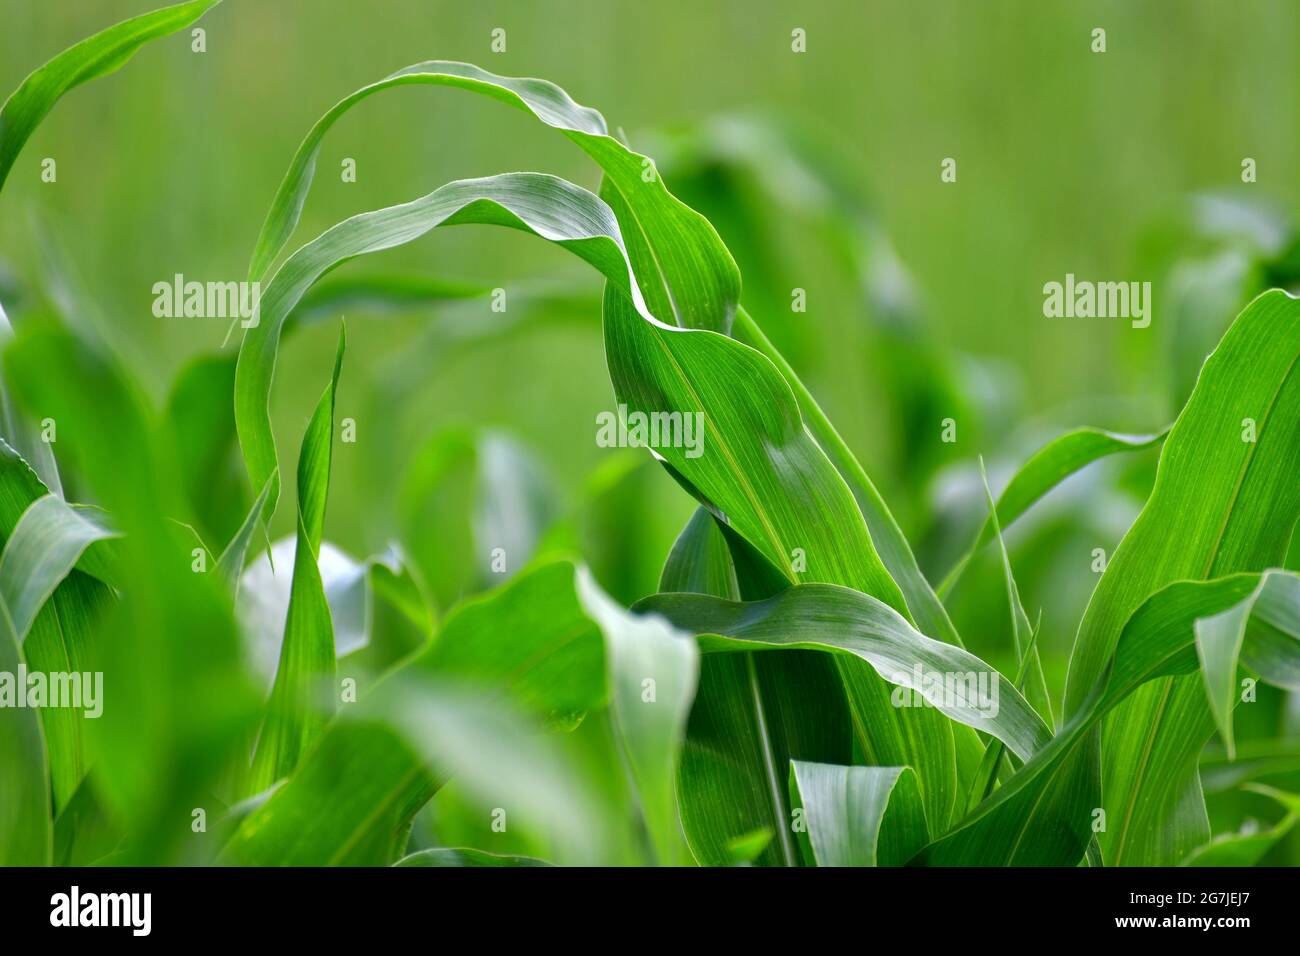 Young corn leaves grow in a garden bed Stock Photo